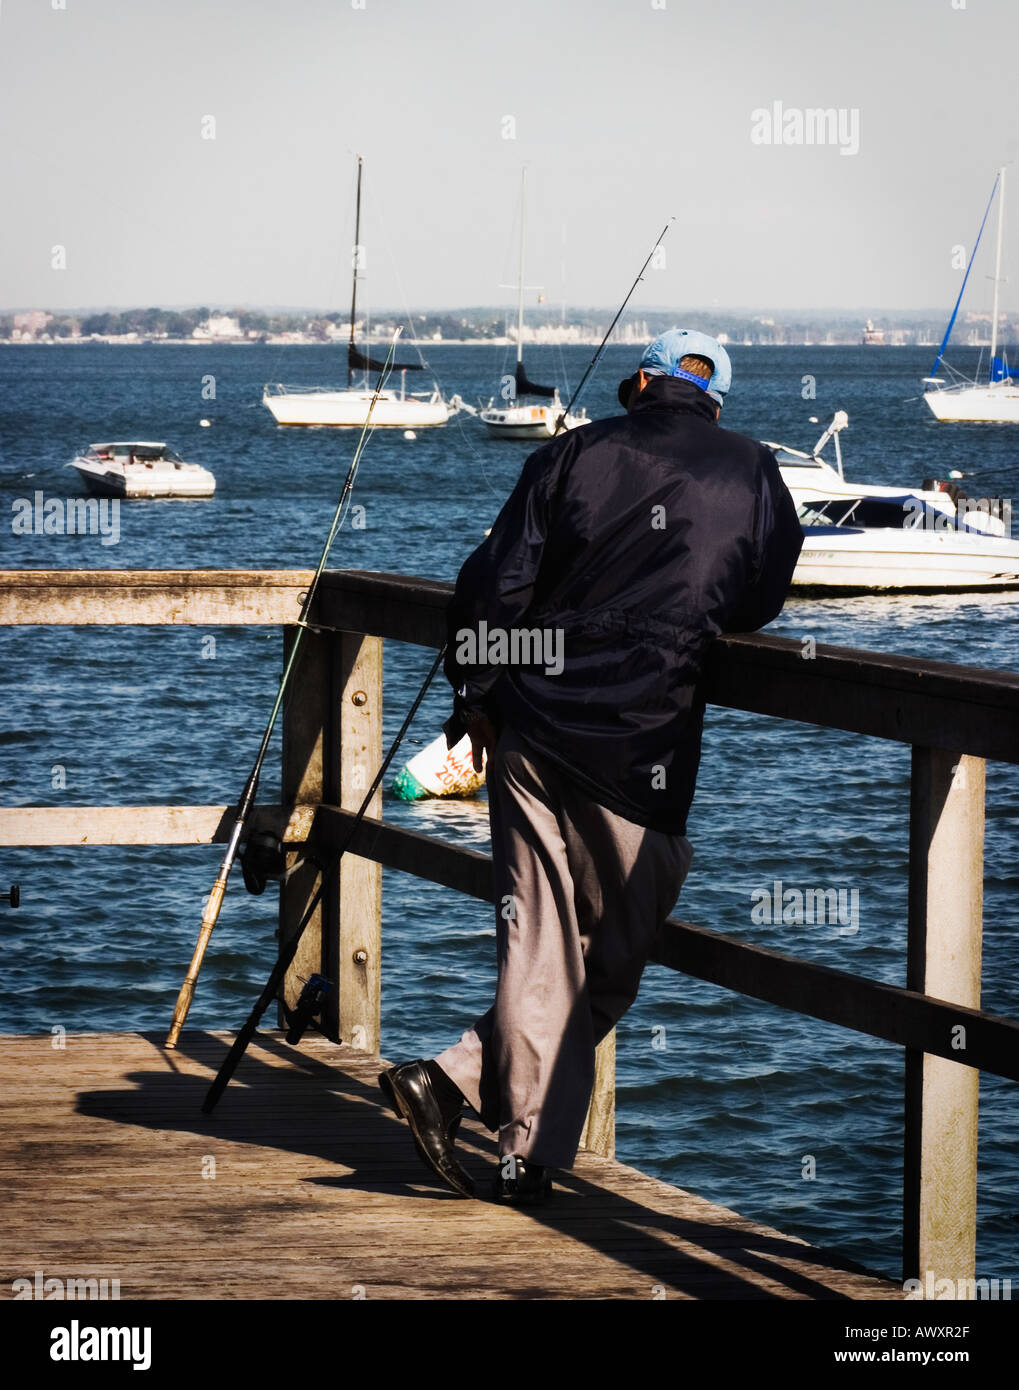 man fishing off a wooden pier with water in background and many boats anchored at a marina Stock Photo